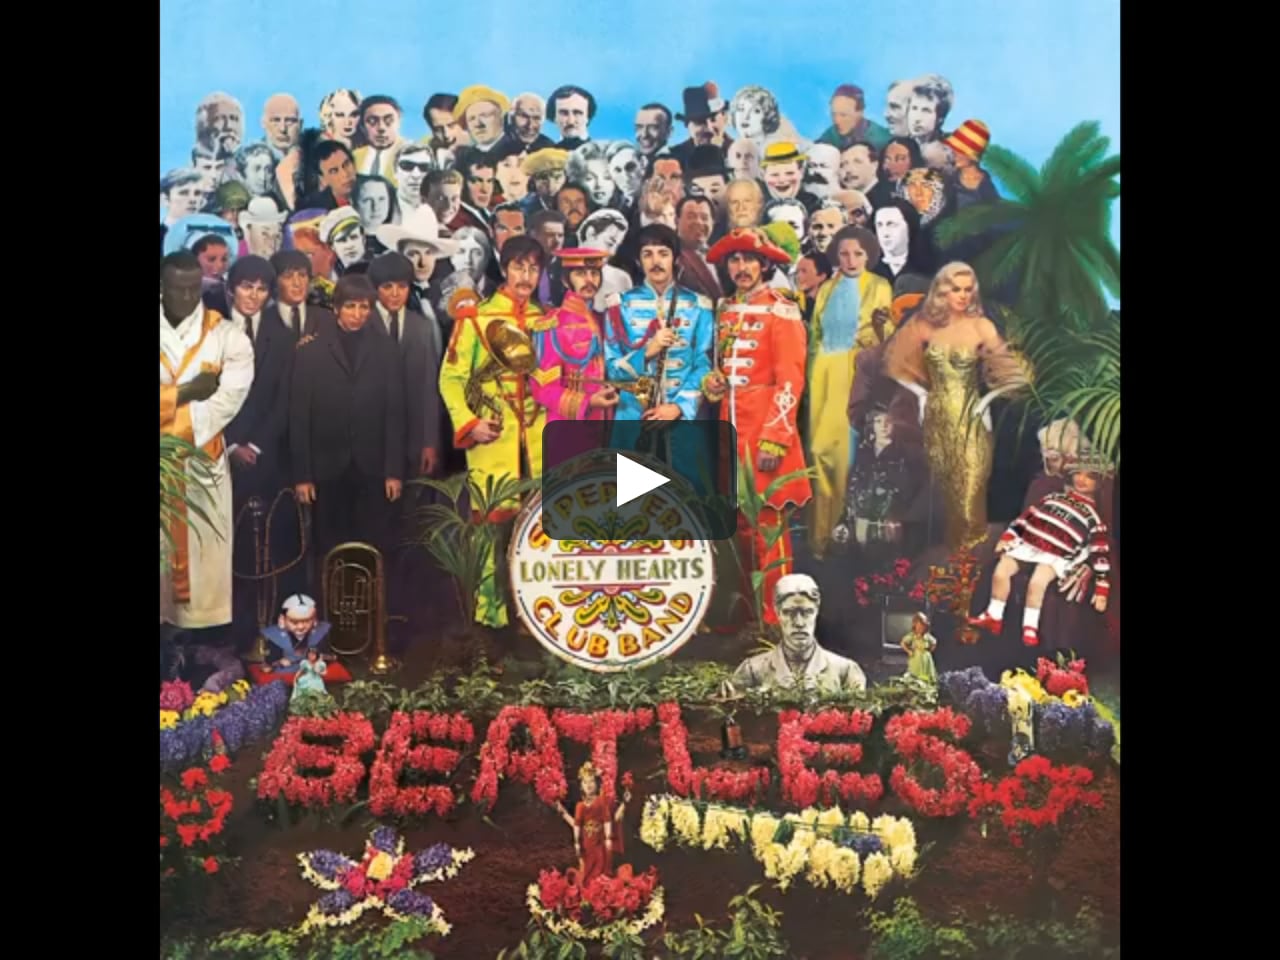 Sgt Pepper's Lonely Hearts Club Band (2019 Remastered) on Vimeo